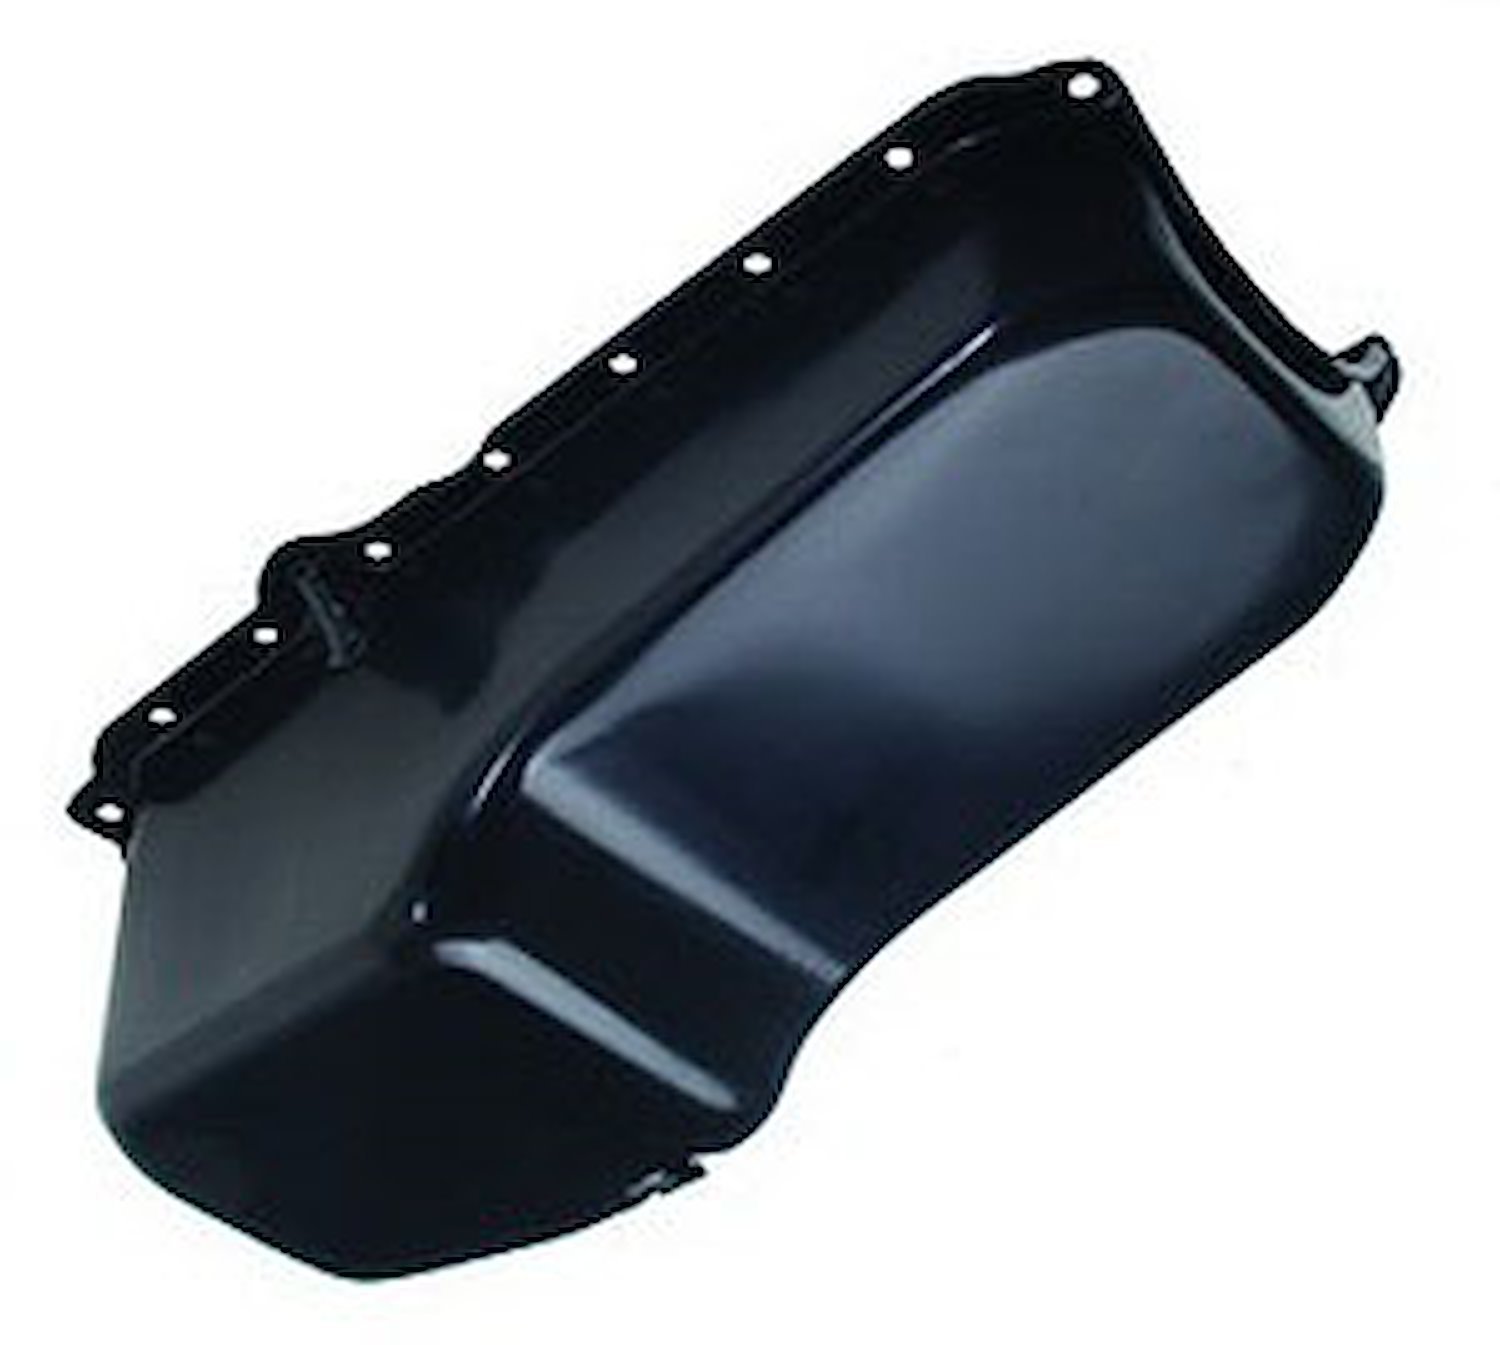 Black Powdercoated Oil Pan 1986-2000 Small Block Chevy 305-350